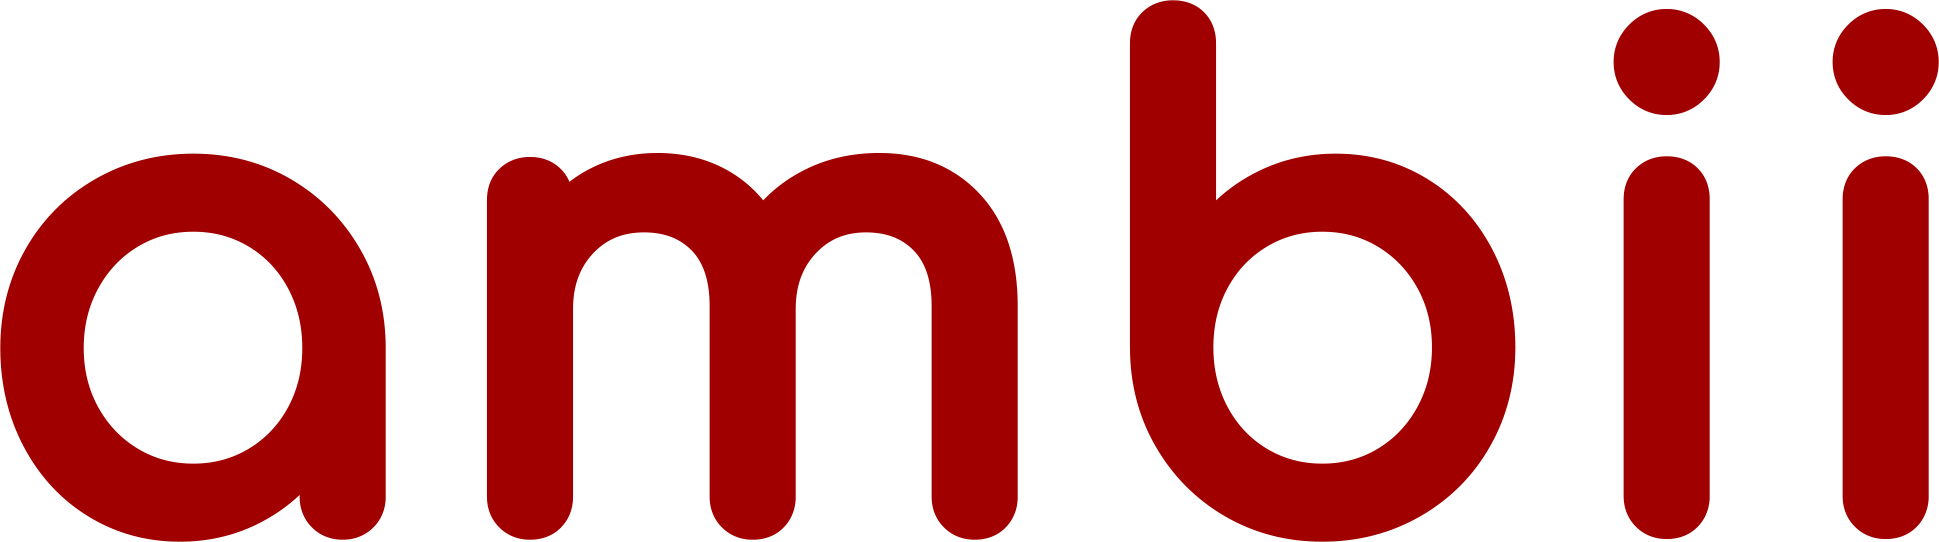 Ambii text logo (red)